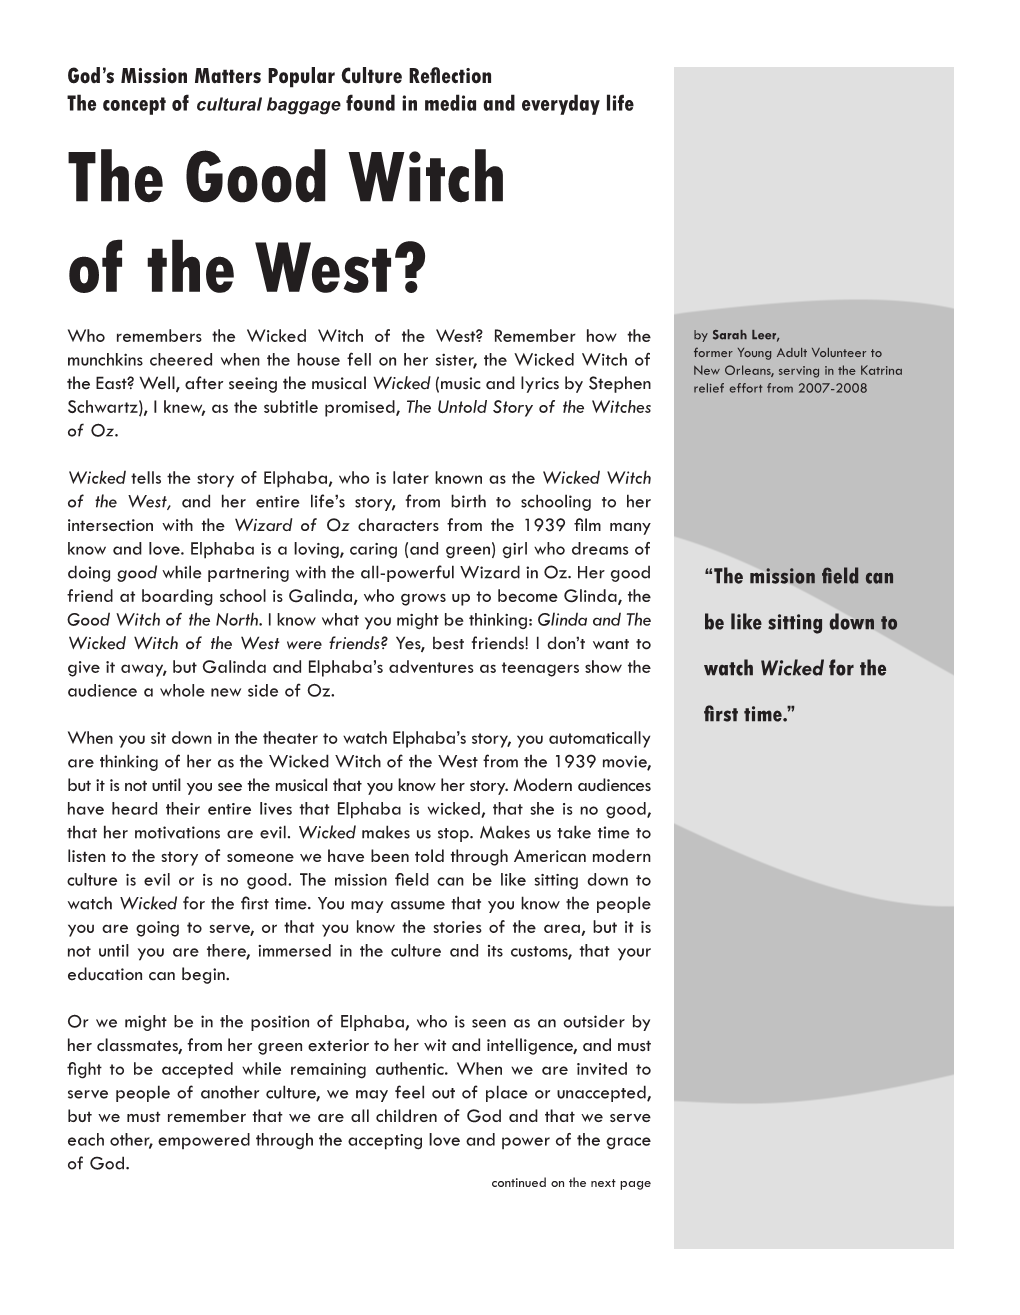 The Good Witch of the West? God's Mission Matters Popular Culture